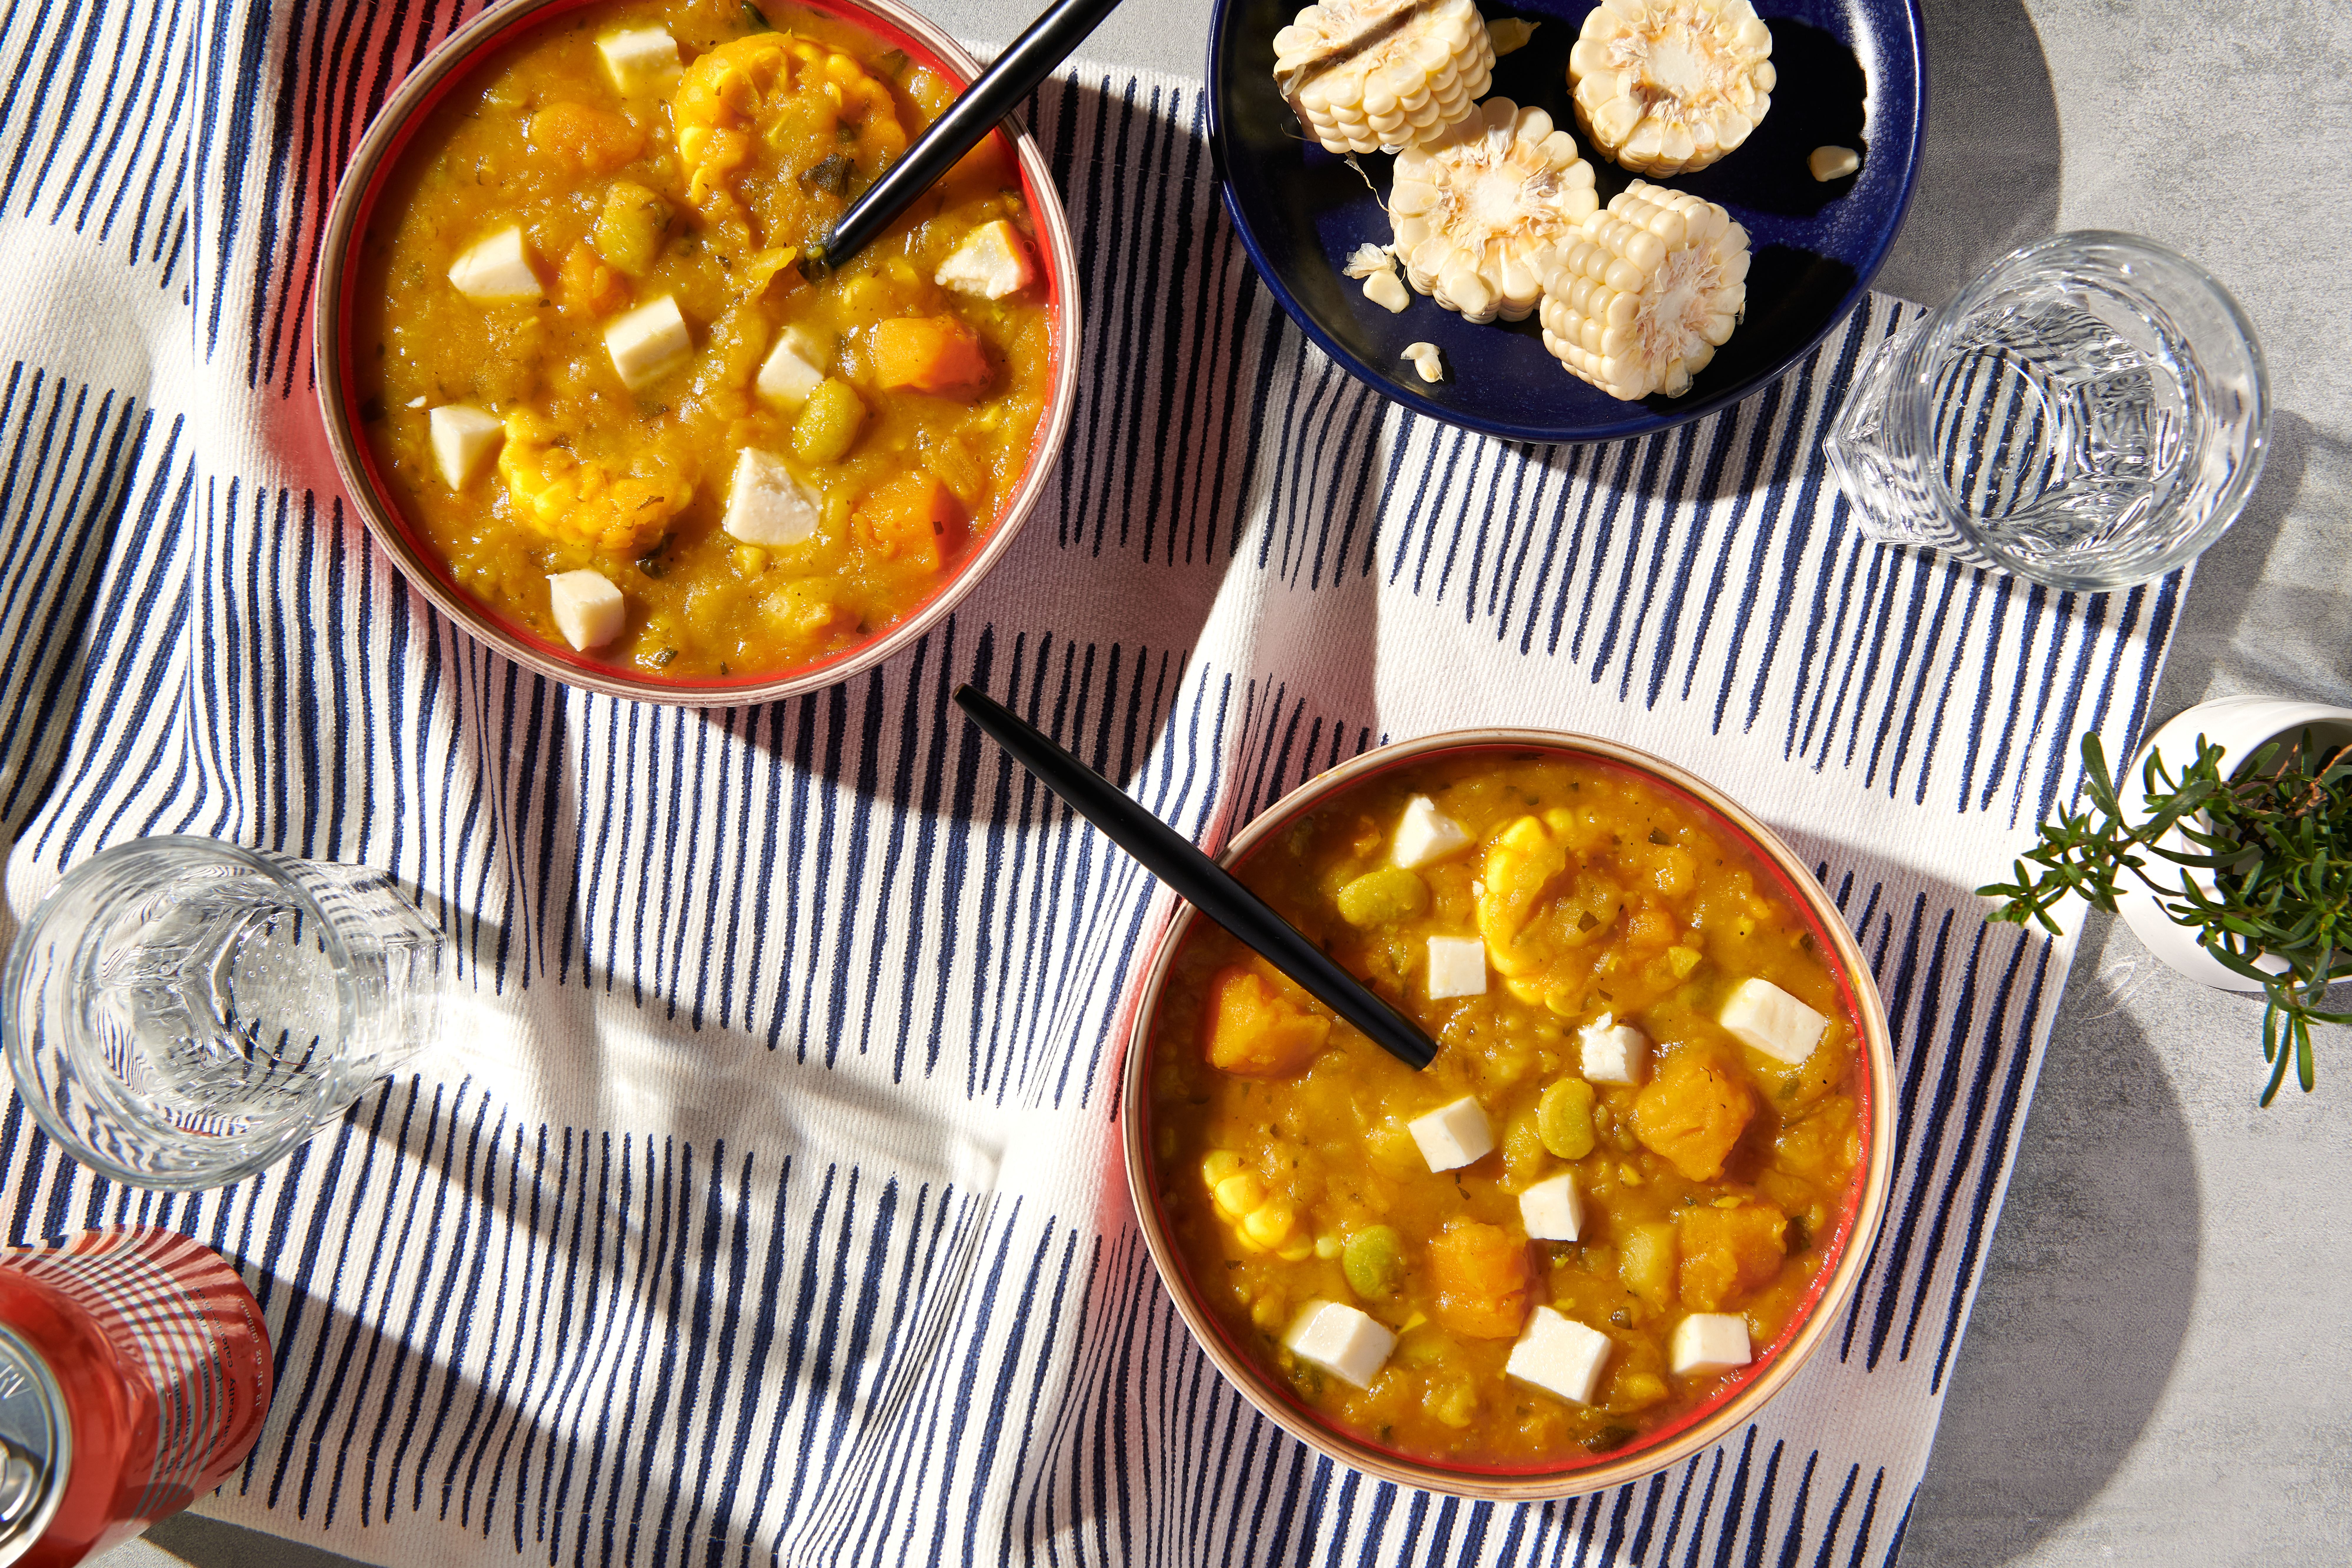 Two bowls of locro on a table, next to another bowl containing sliced corn cobs.